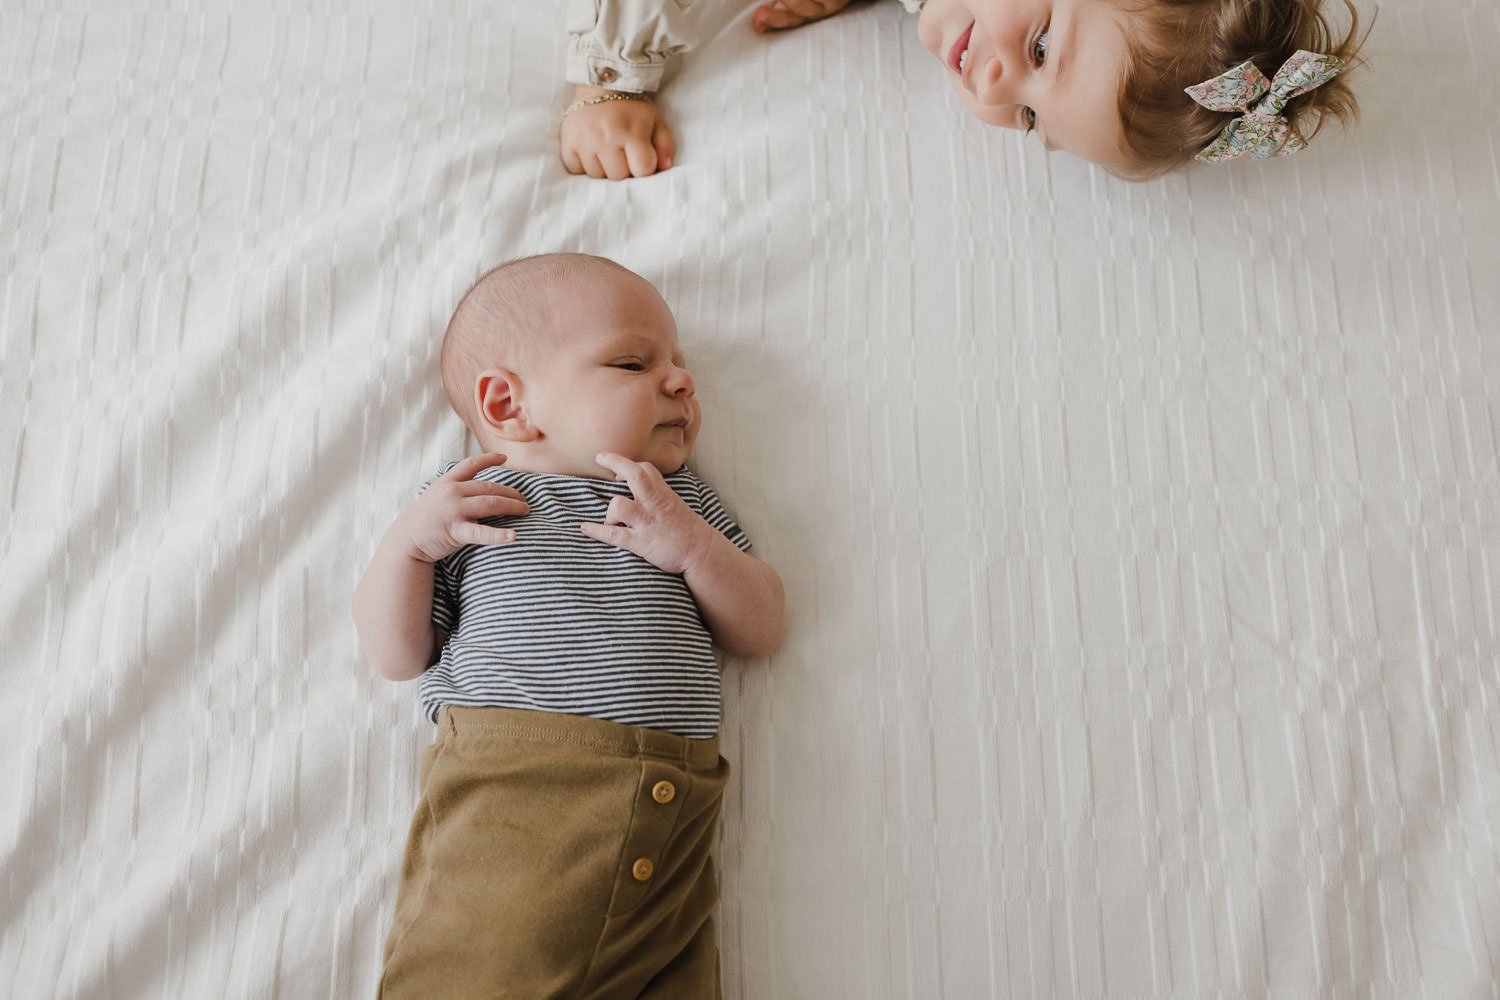 Candid In-Home Family Portraits with toddler and newborn